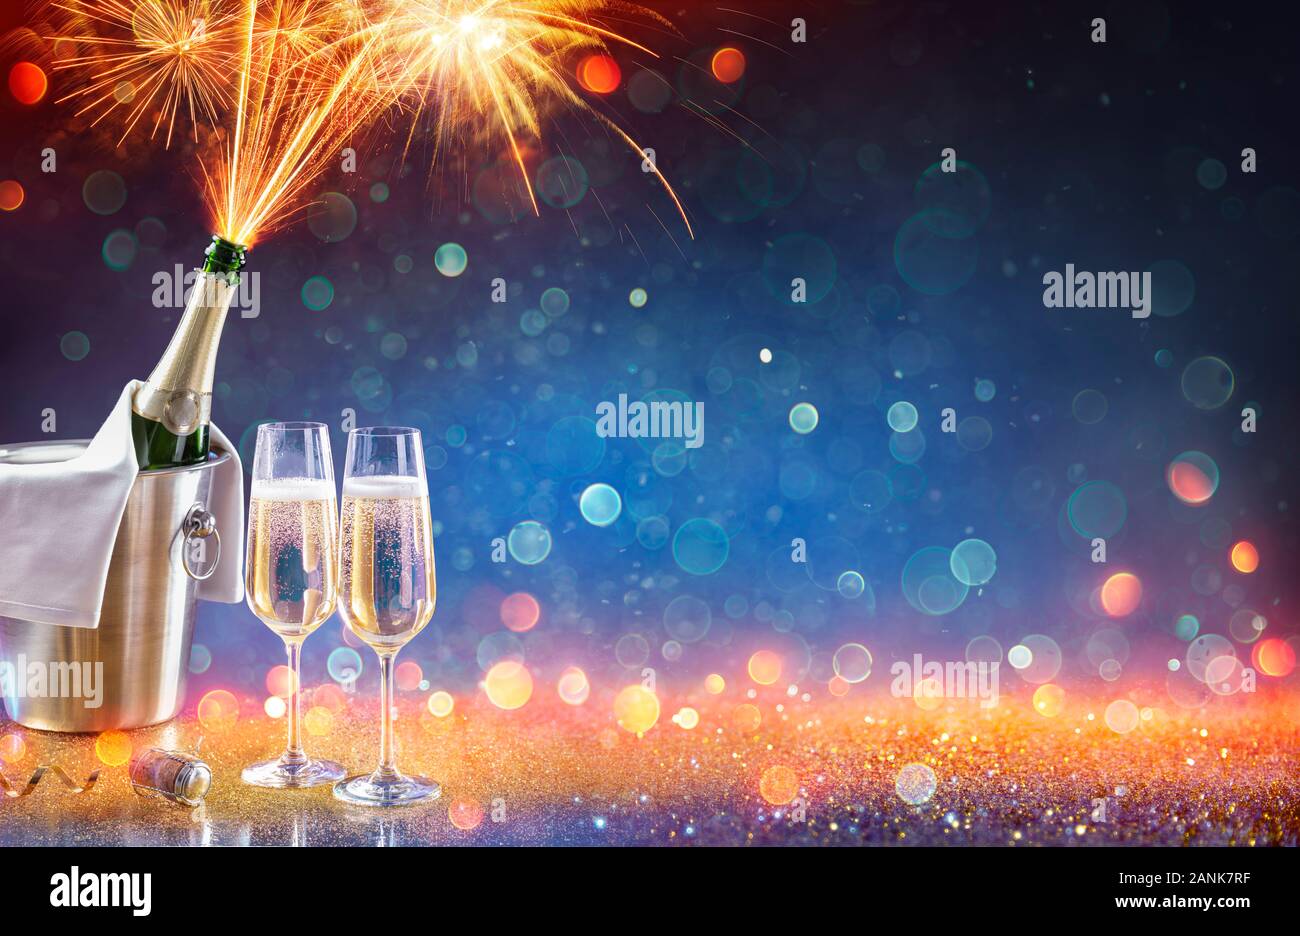 New Year Celebration With Champagne And Fireworks Popping In Bottle Color Trend 2020 Stock Photo